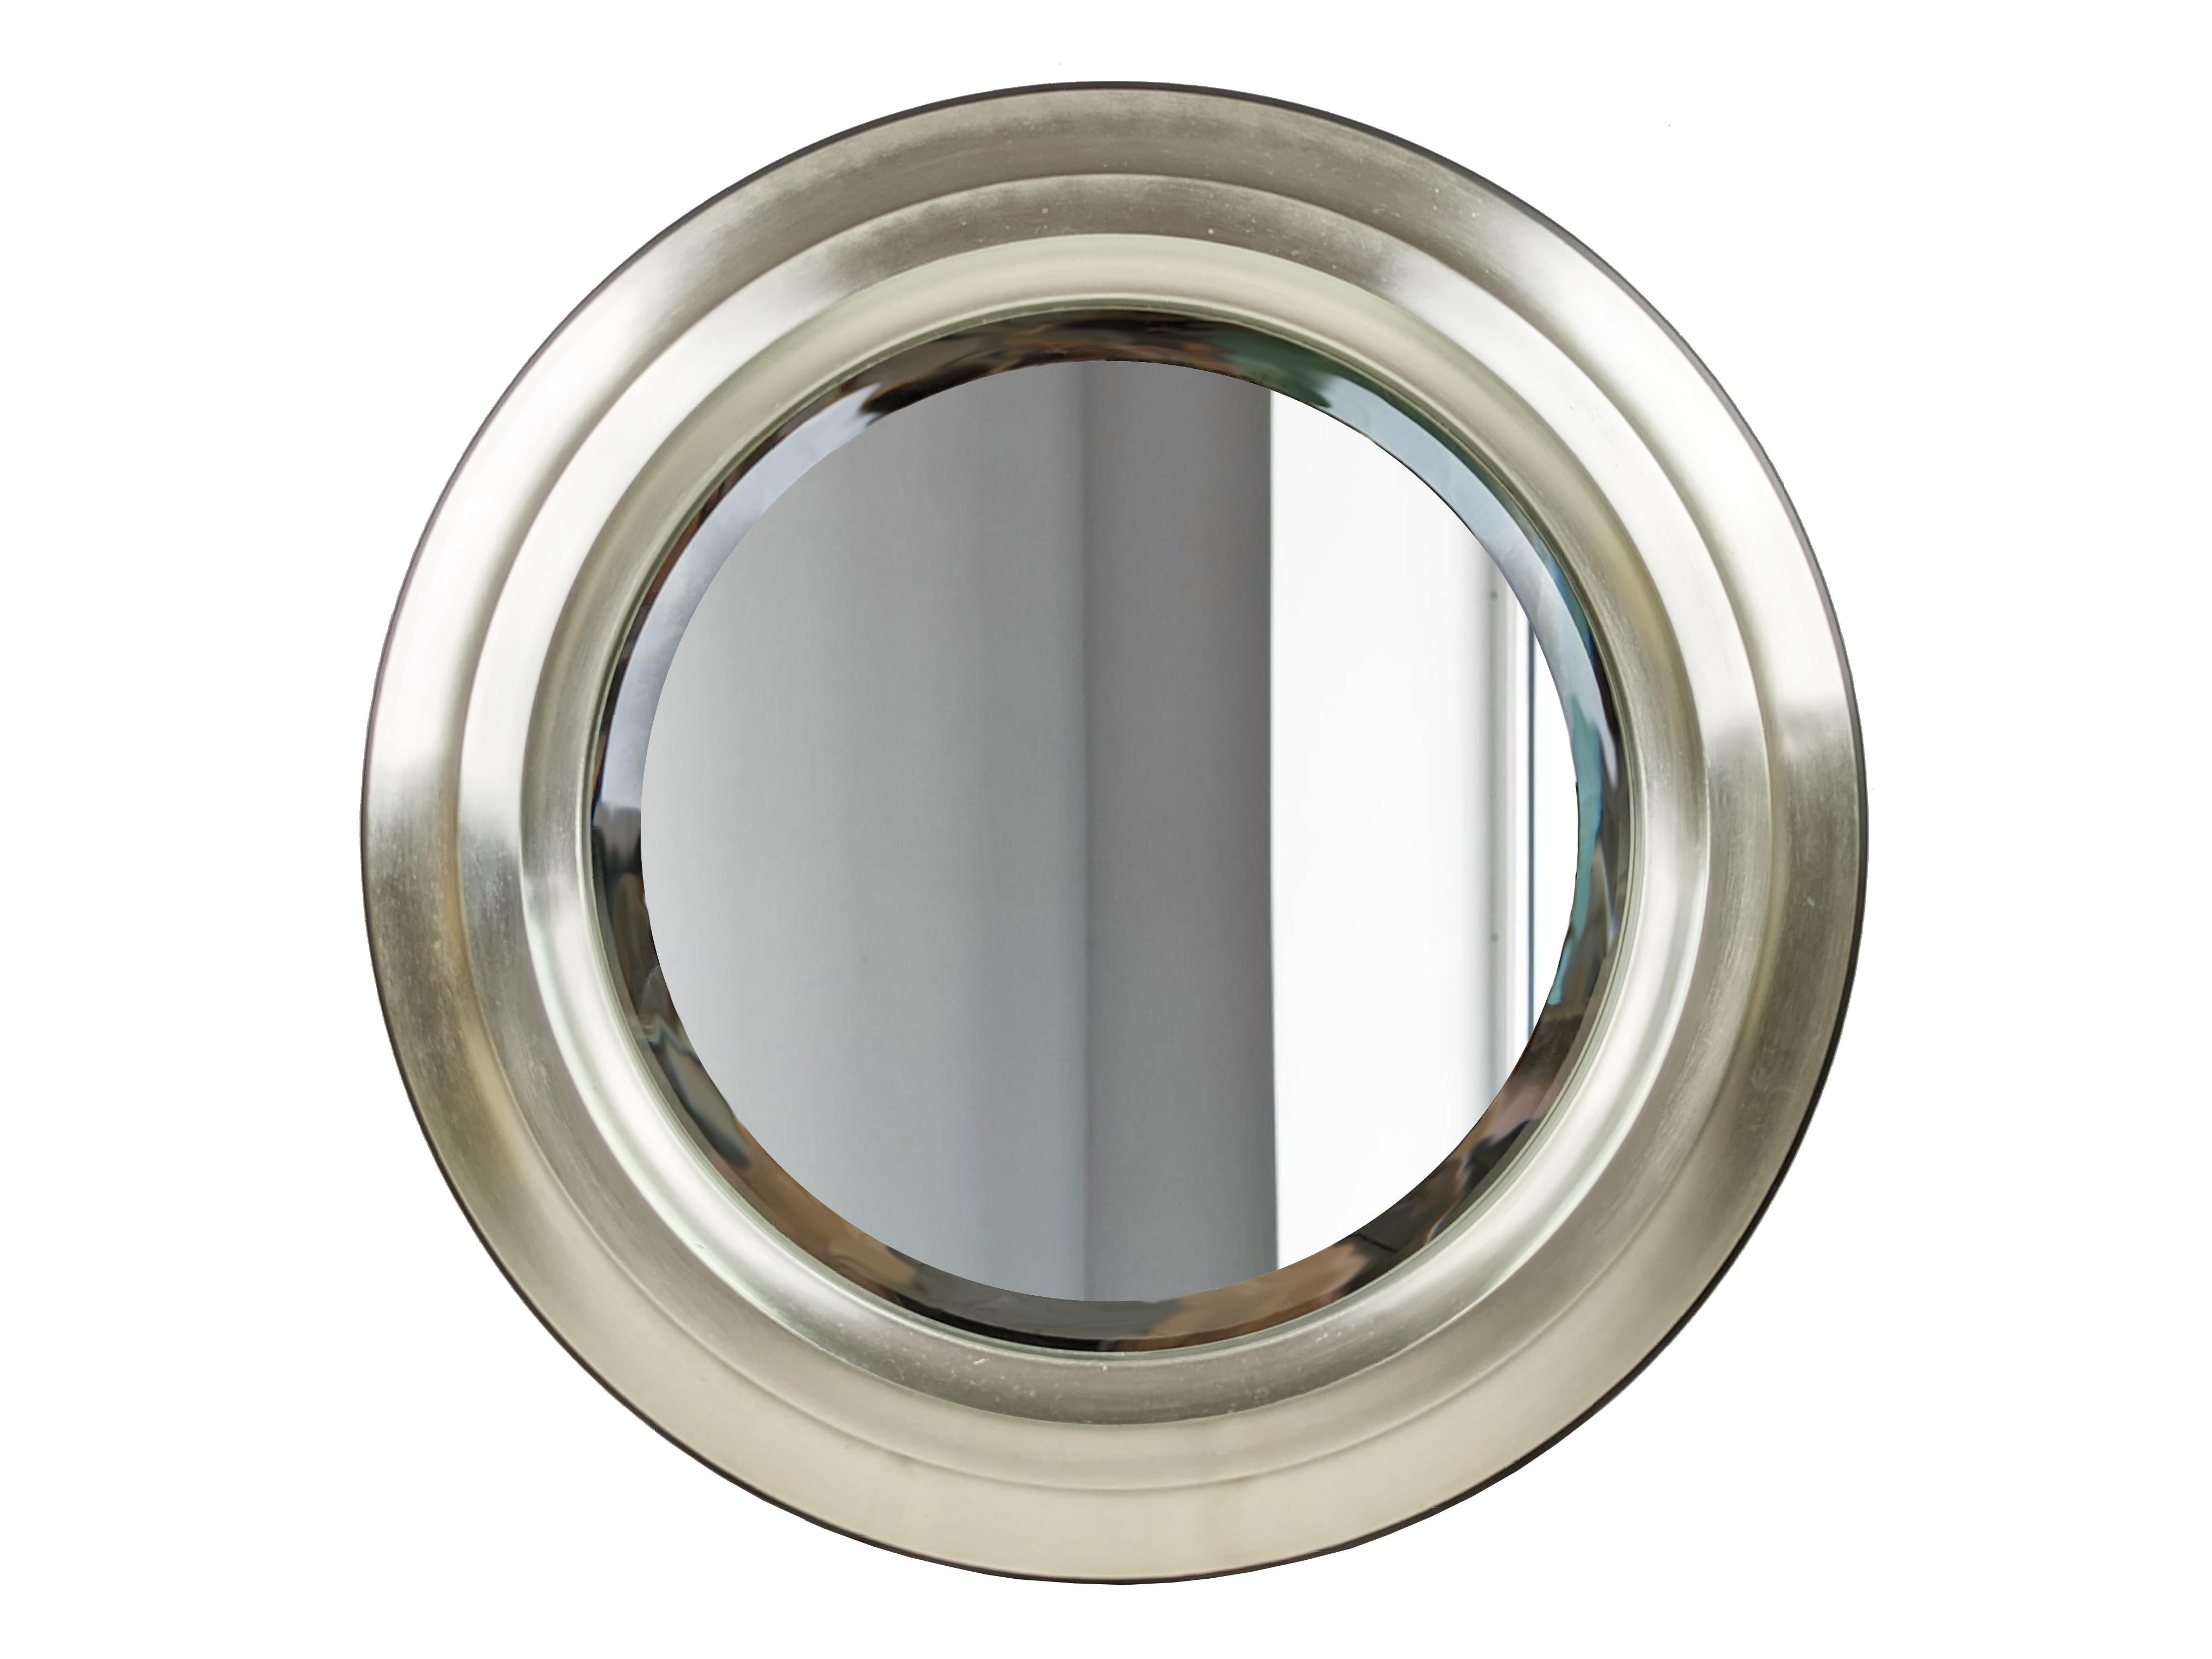 Brass & Nickel Plated Metal 1960s round mirrors, set of 2 For Sale 5